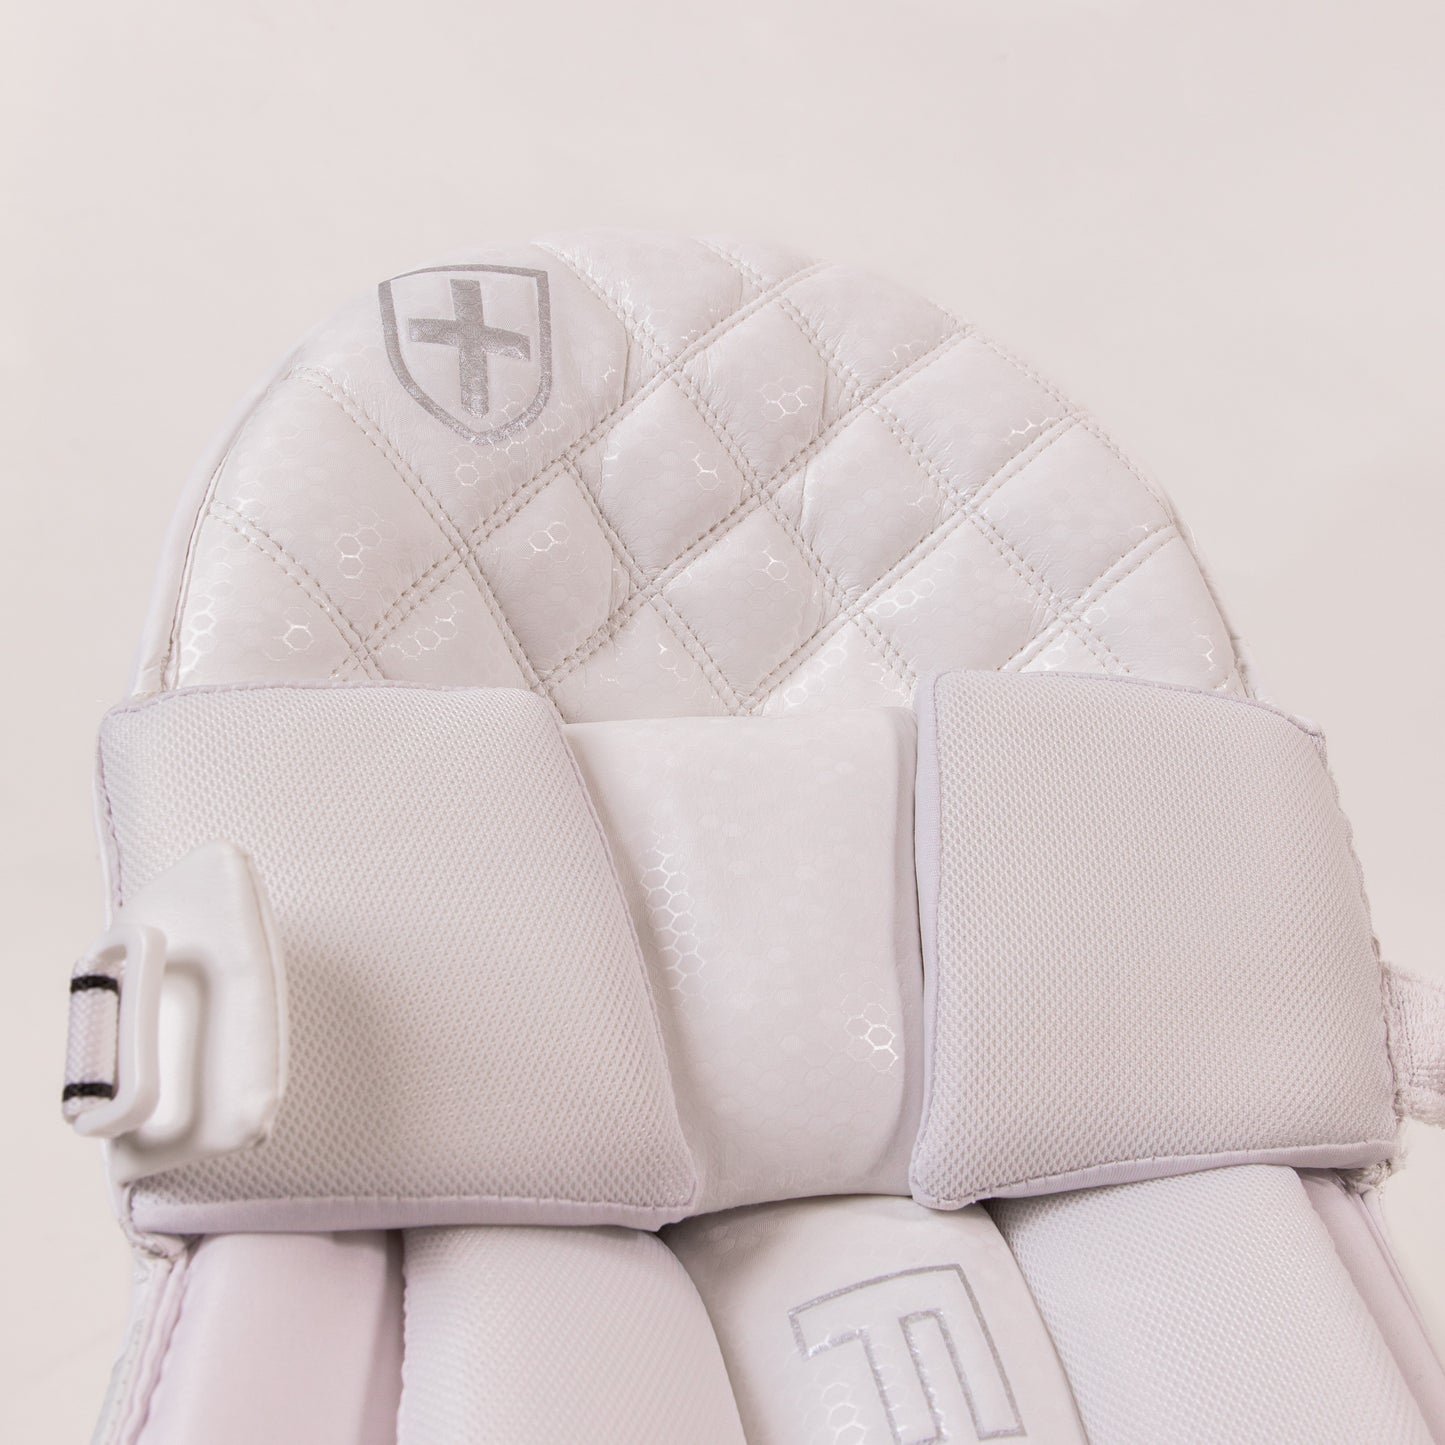 Focus LIMITED Edition Pads - White